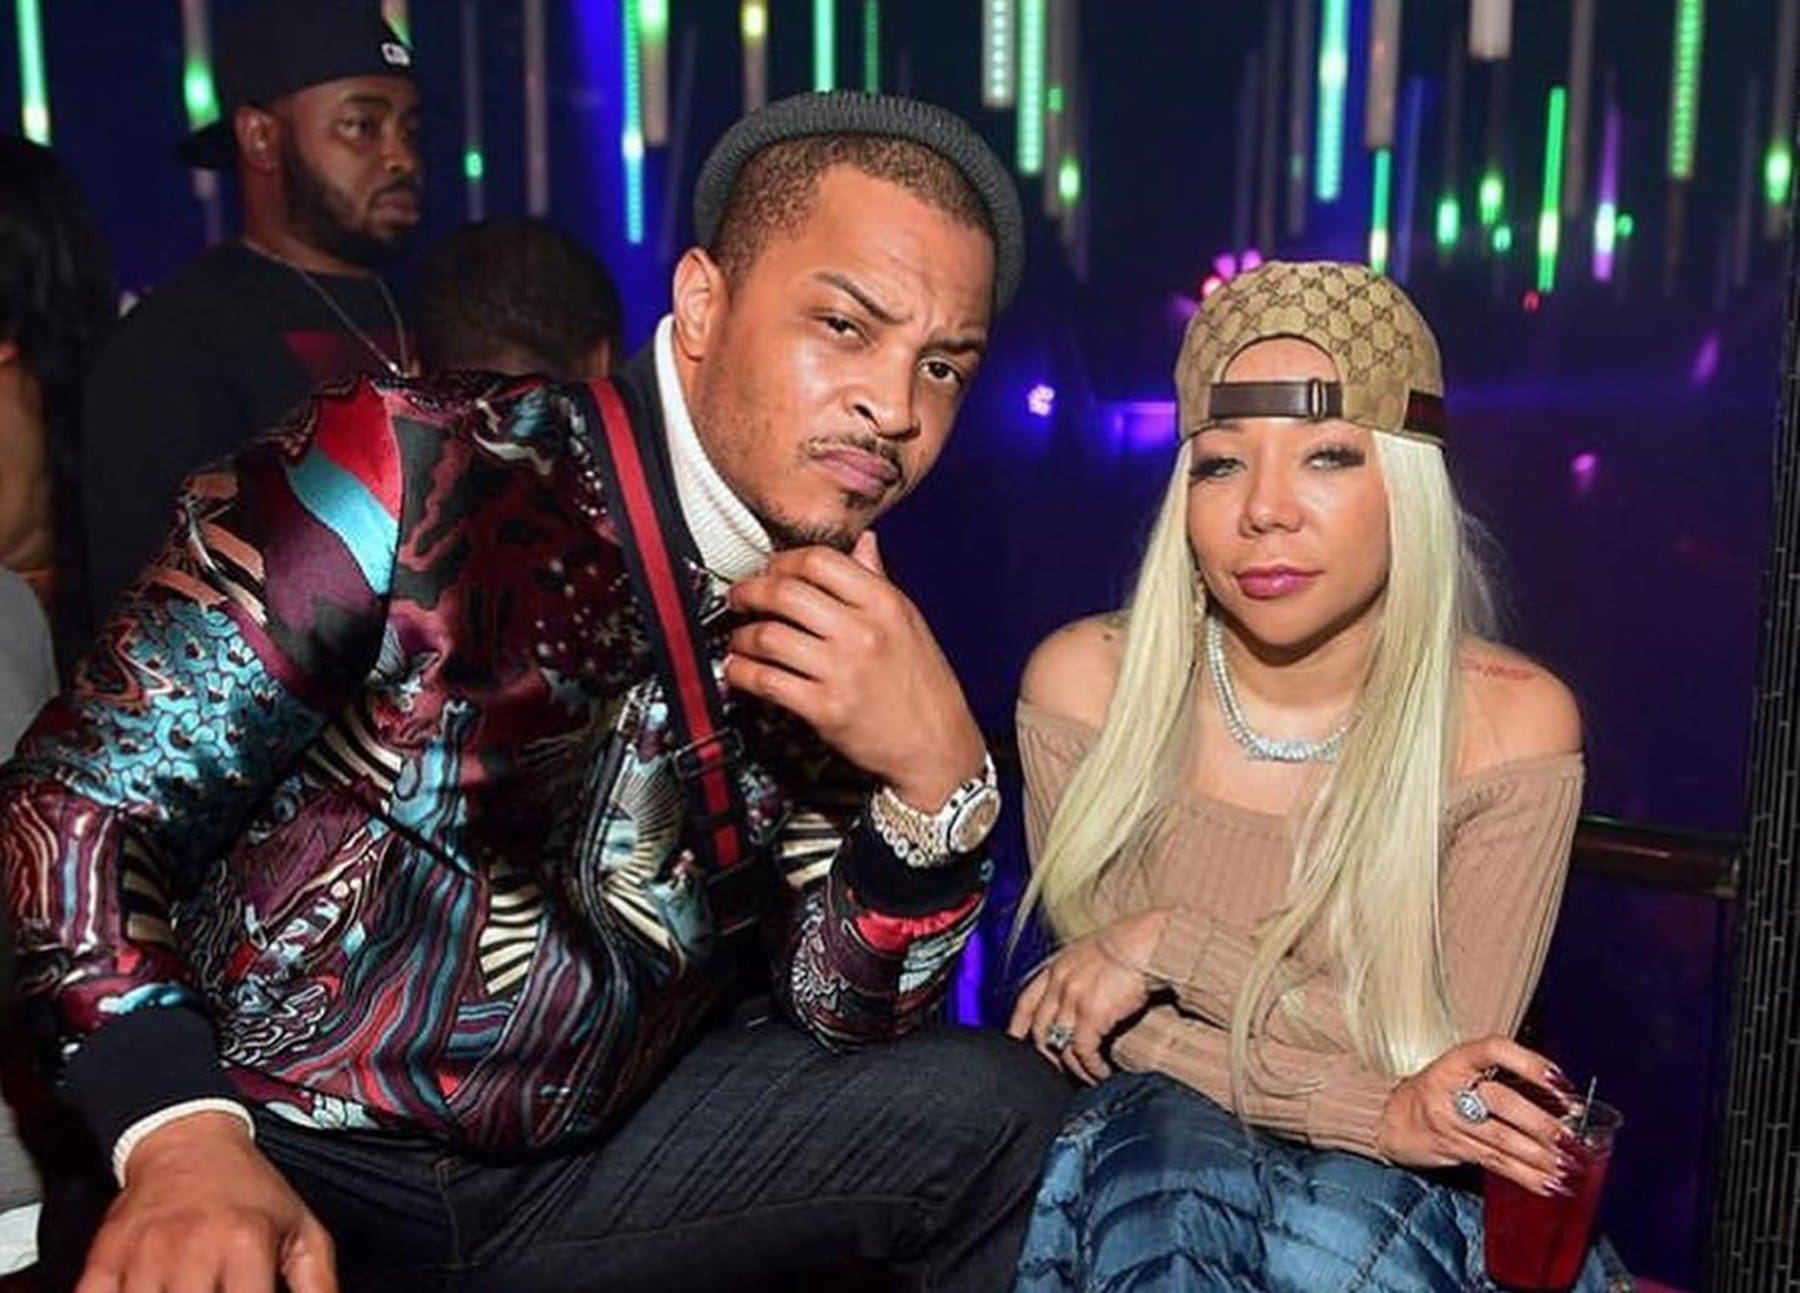 Tiny Harris Shares More Gorgeous Photos From Her Birthday Trip With T.I. - See Their Colorful Matching Outfits